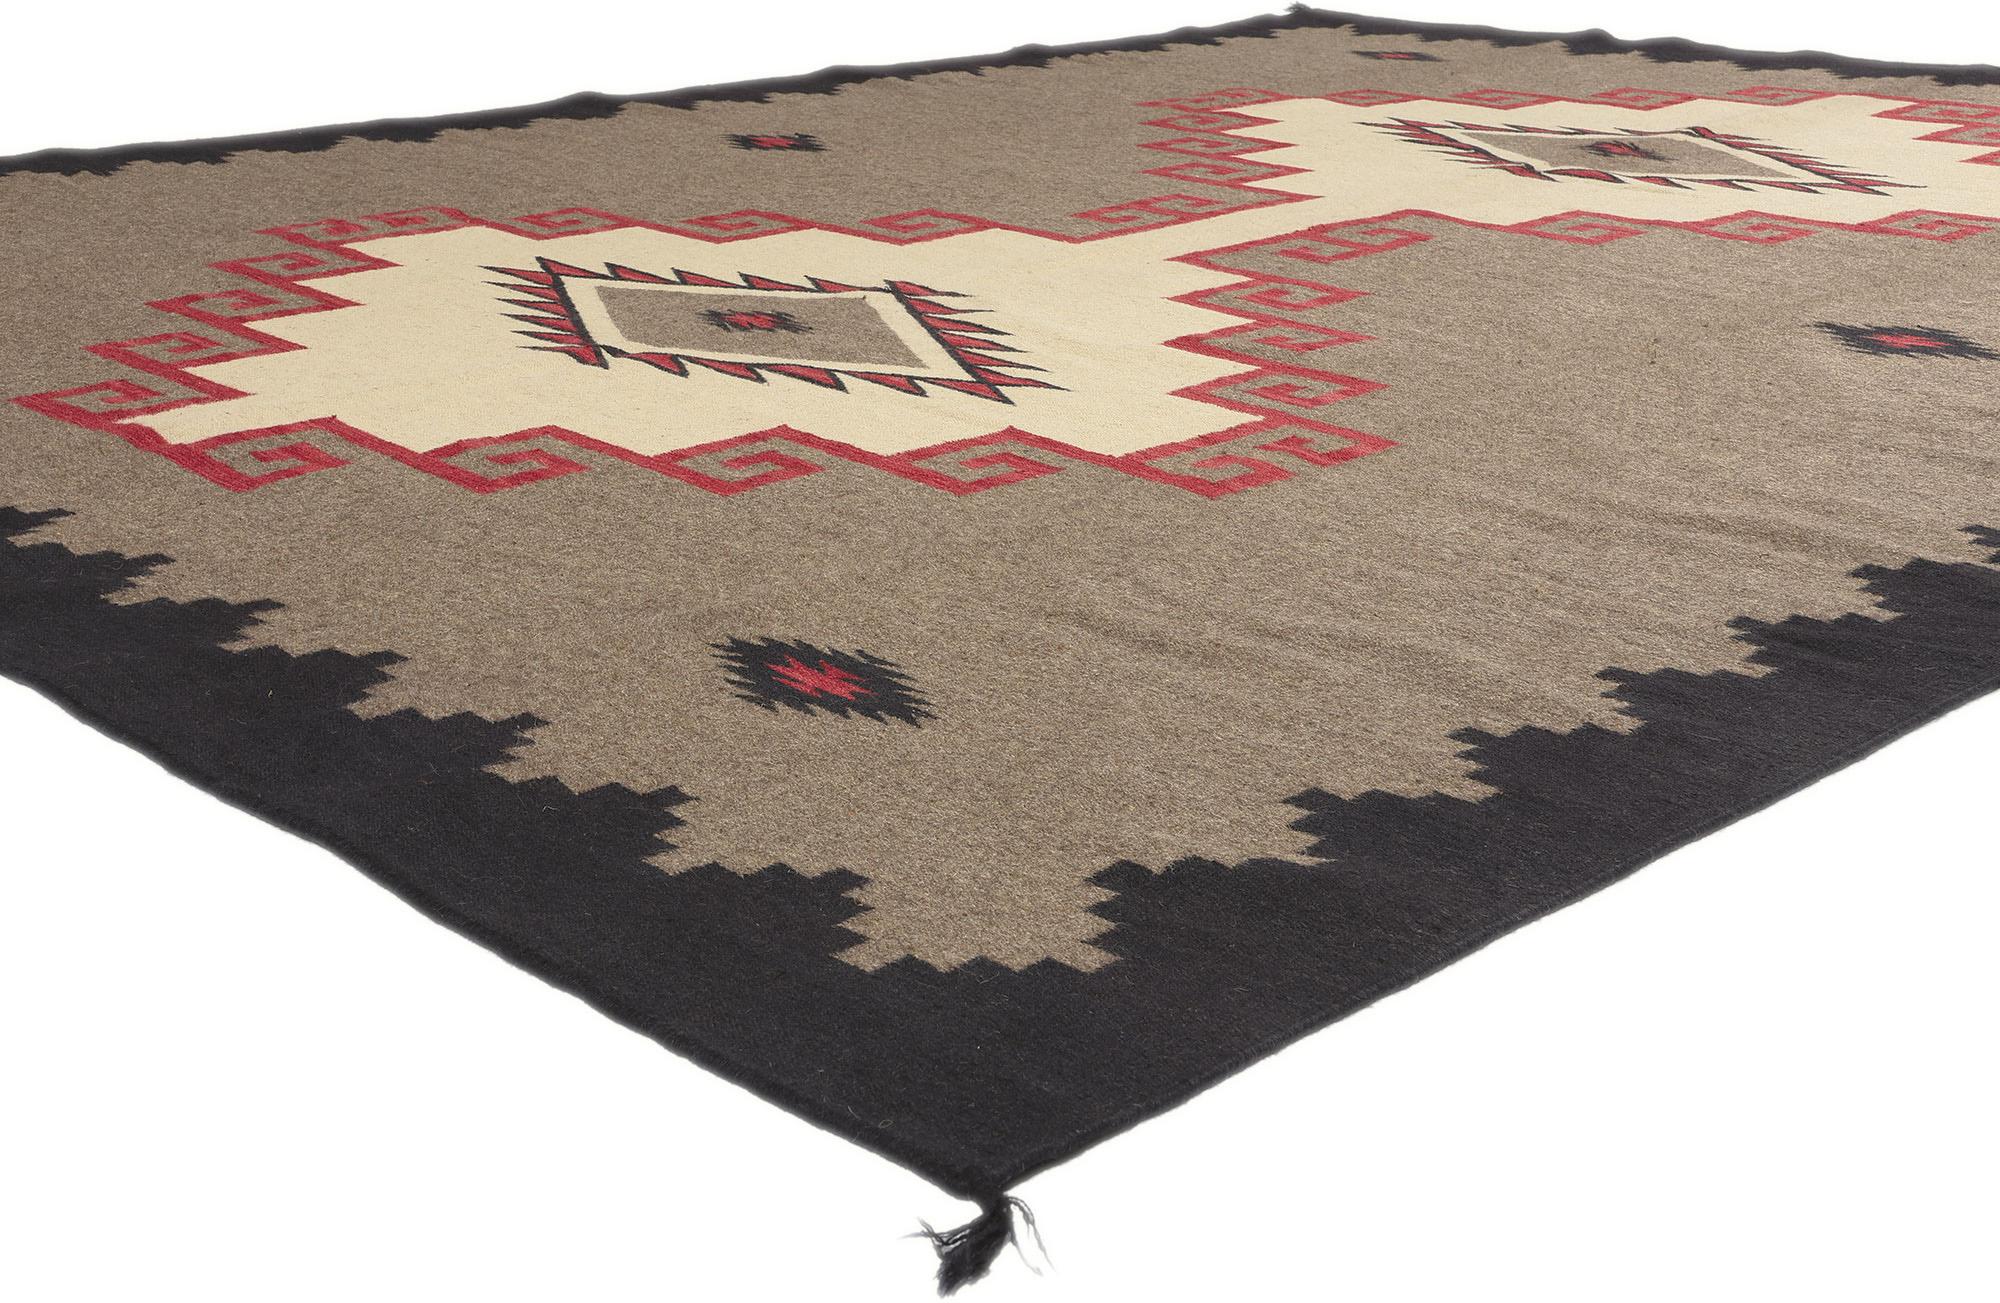 81030 Southwest Modern Ganado Navajo-Style Rug, 09'00 x 11'10. Immerse your living space in the essence of Southwest Modern aesthetics with this meticulously handwoven wool Ganado Navajo-style rug—a testament to the harmonious blend of Contemporary